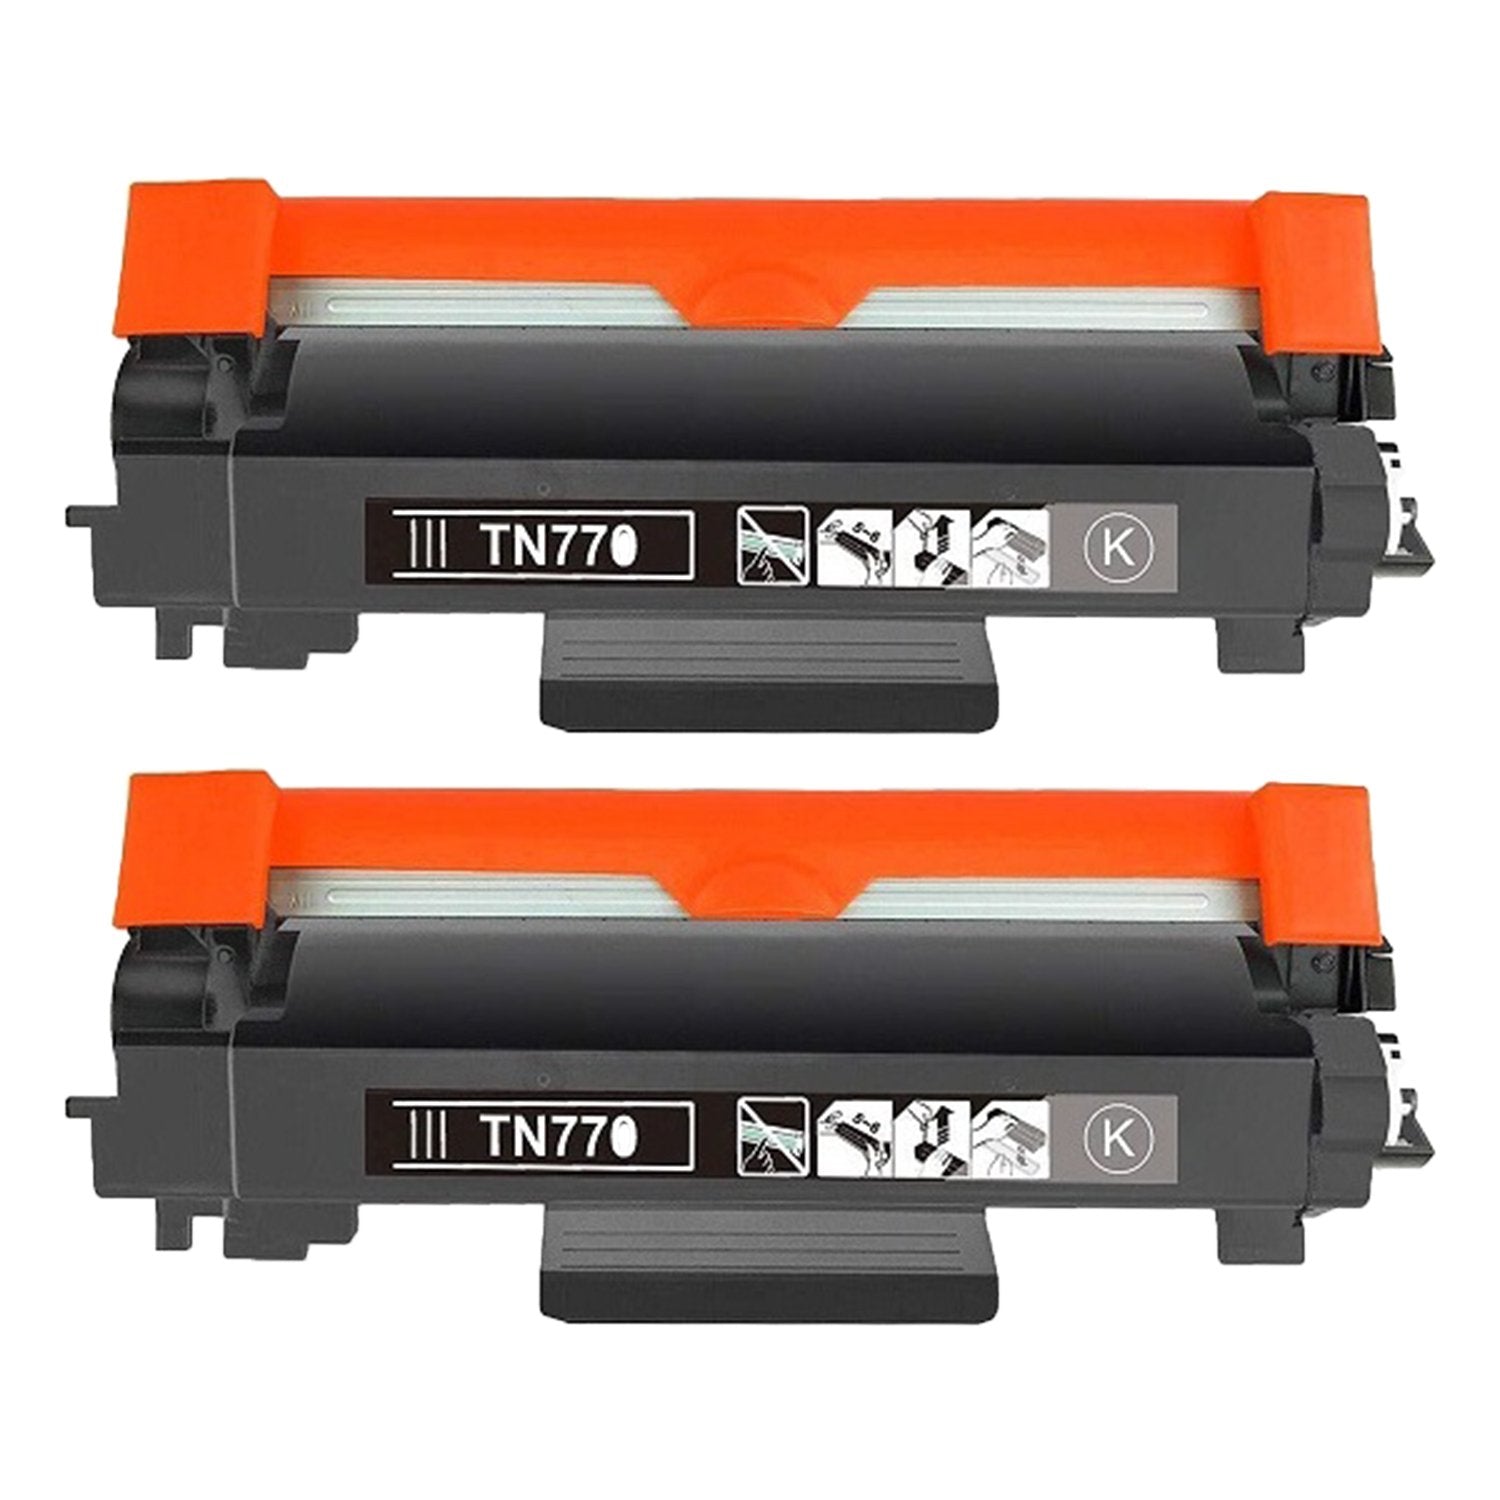 Absolute Toner Compatible Brother TN770 Black  Extra High Yield Toner Cartridge Brother Toner Cartridges